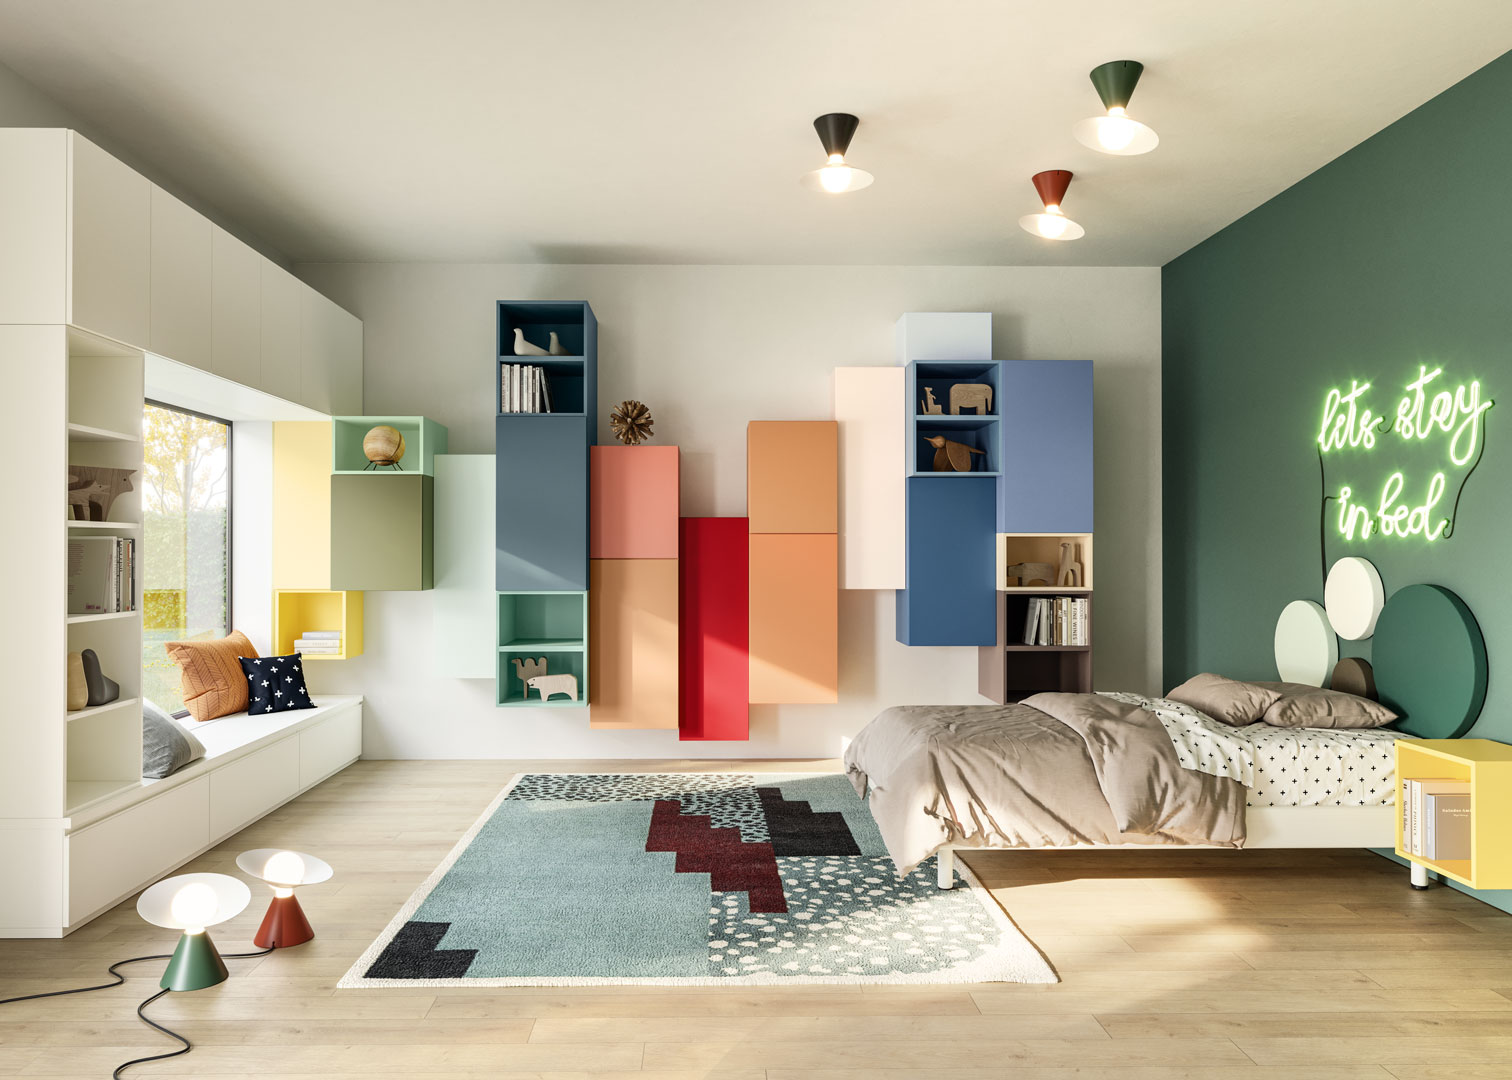 Giessegi launches the new 2023 Uno per Tutti collection of kids’ bedrooms